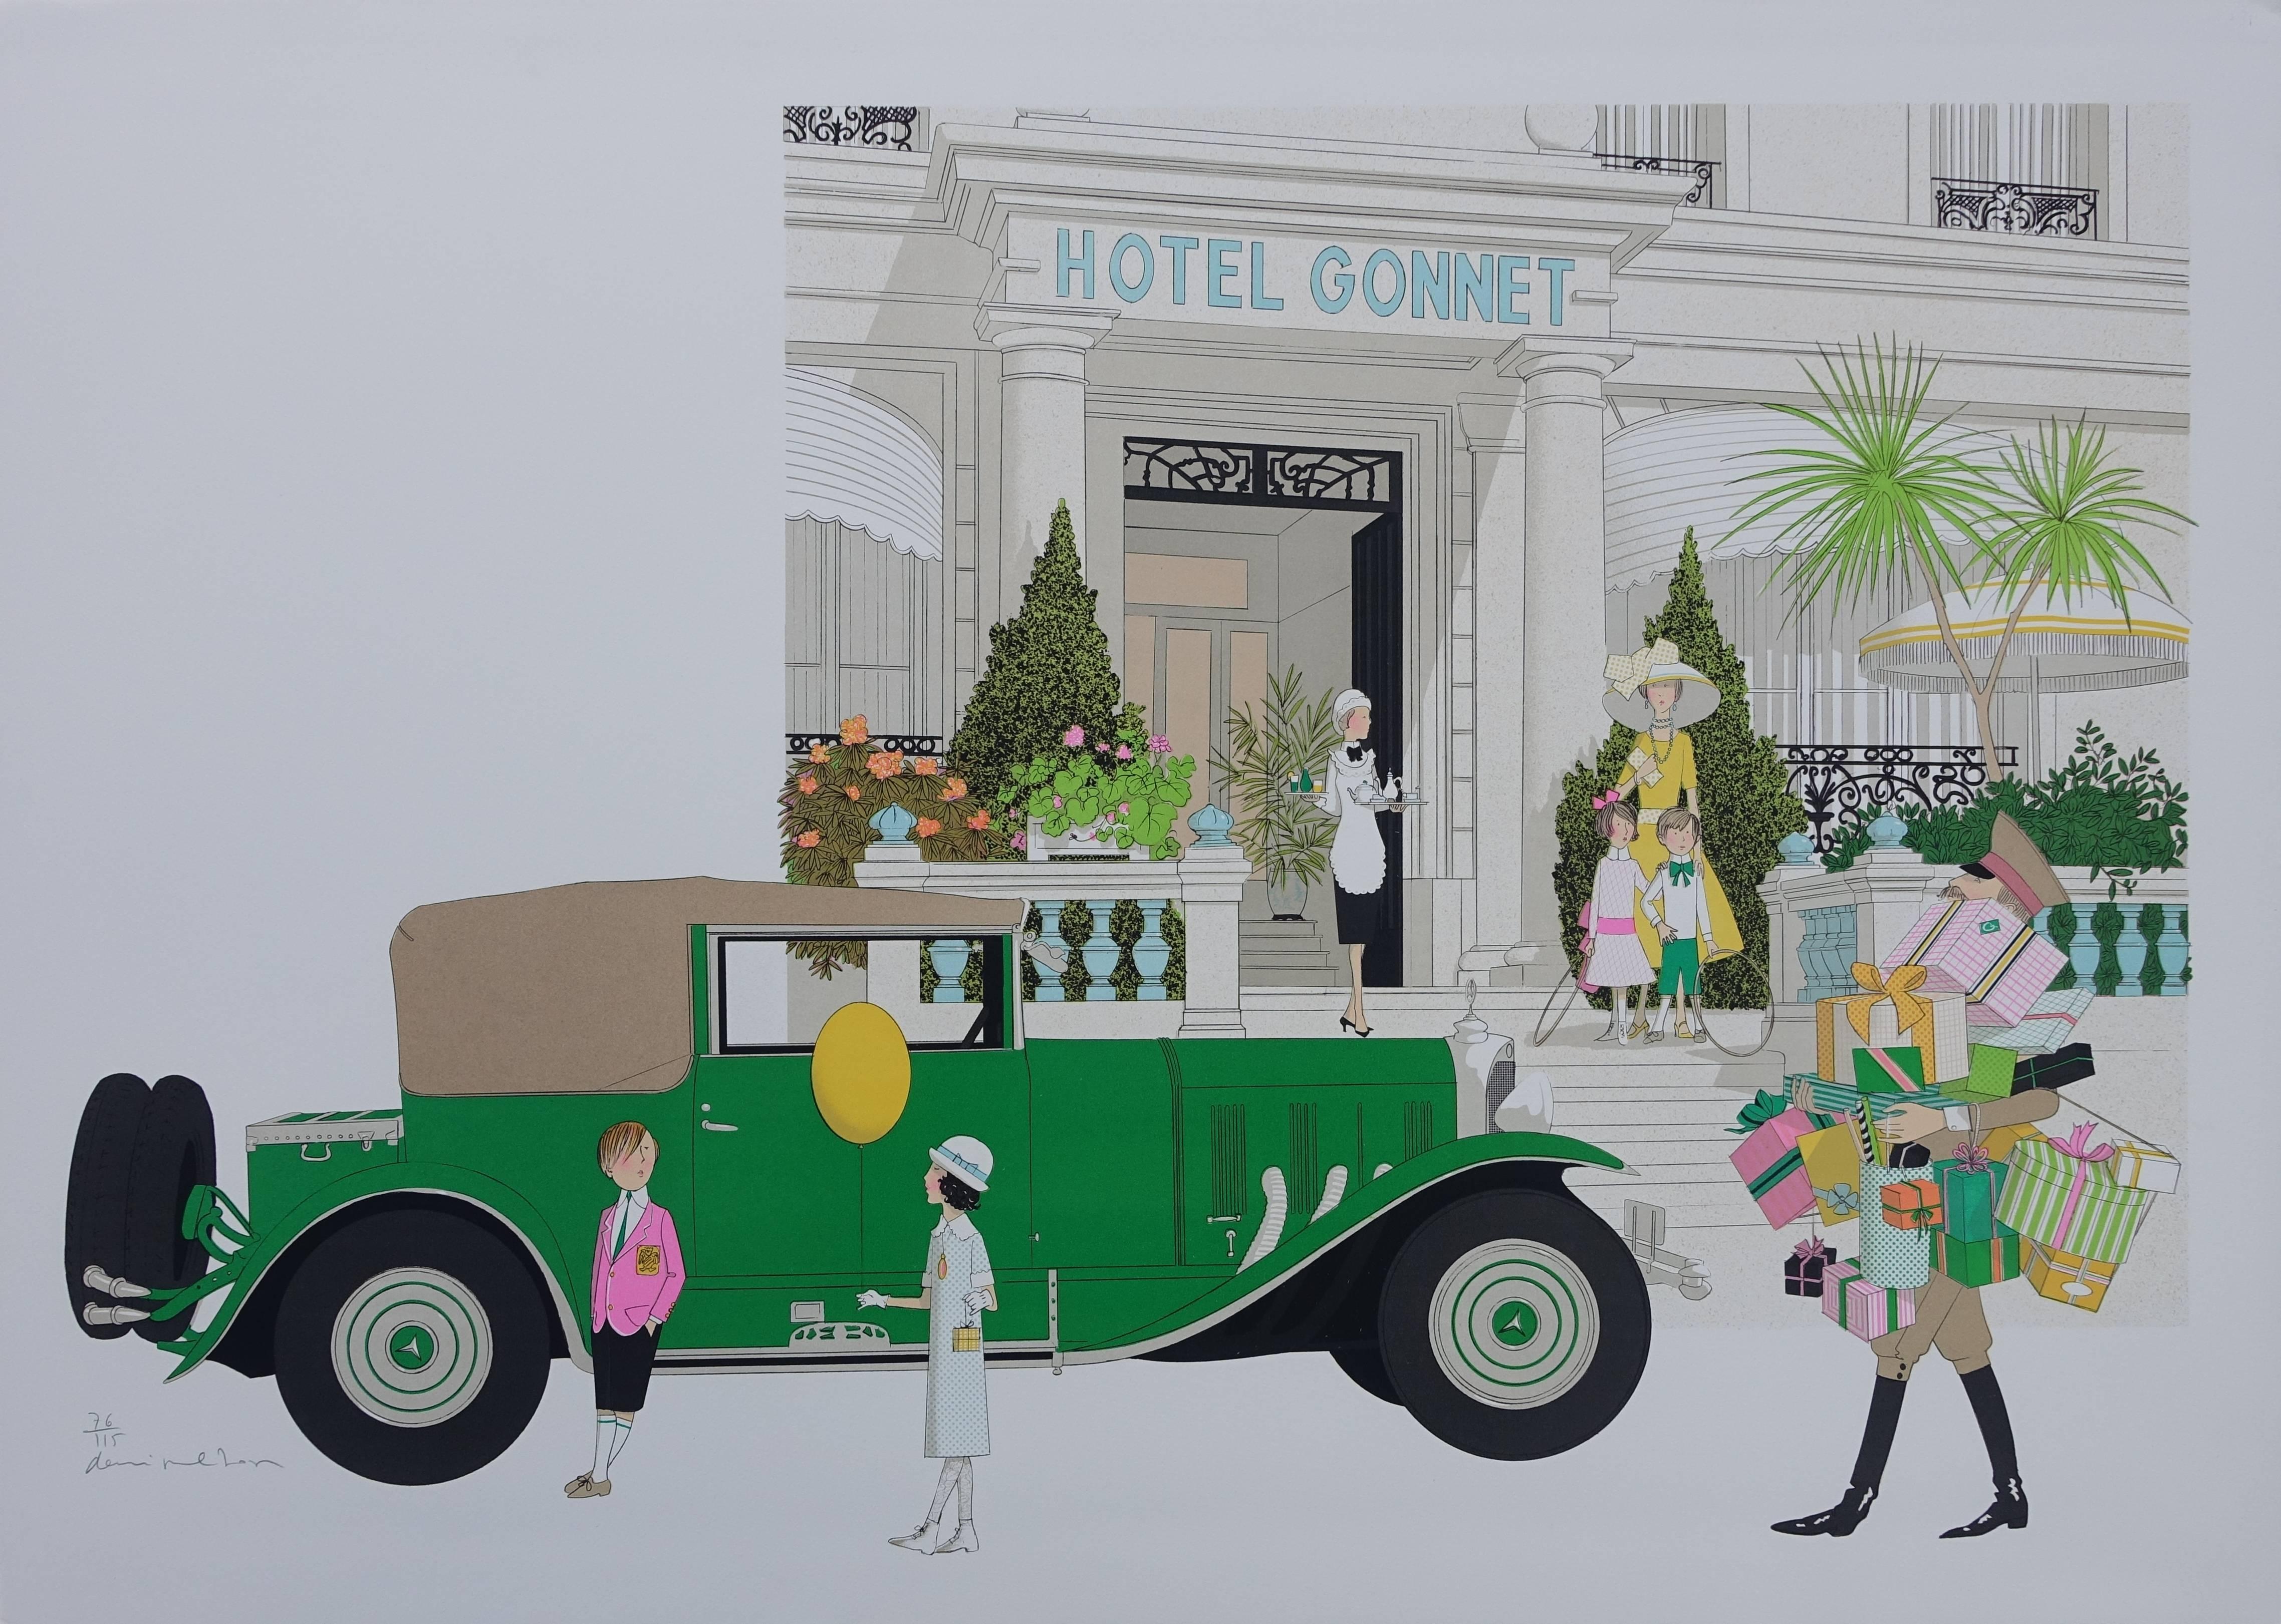 Mercedes 370 and Hotel Gonnet - Signed lithograph - 115ex